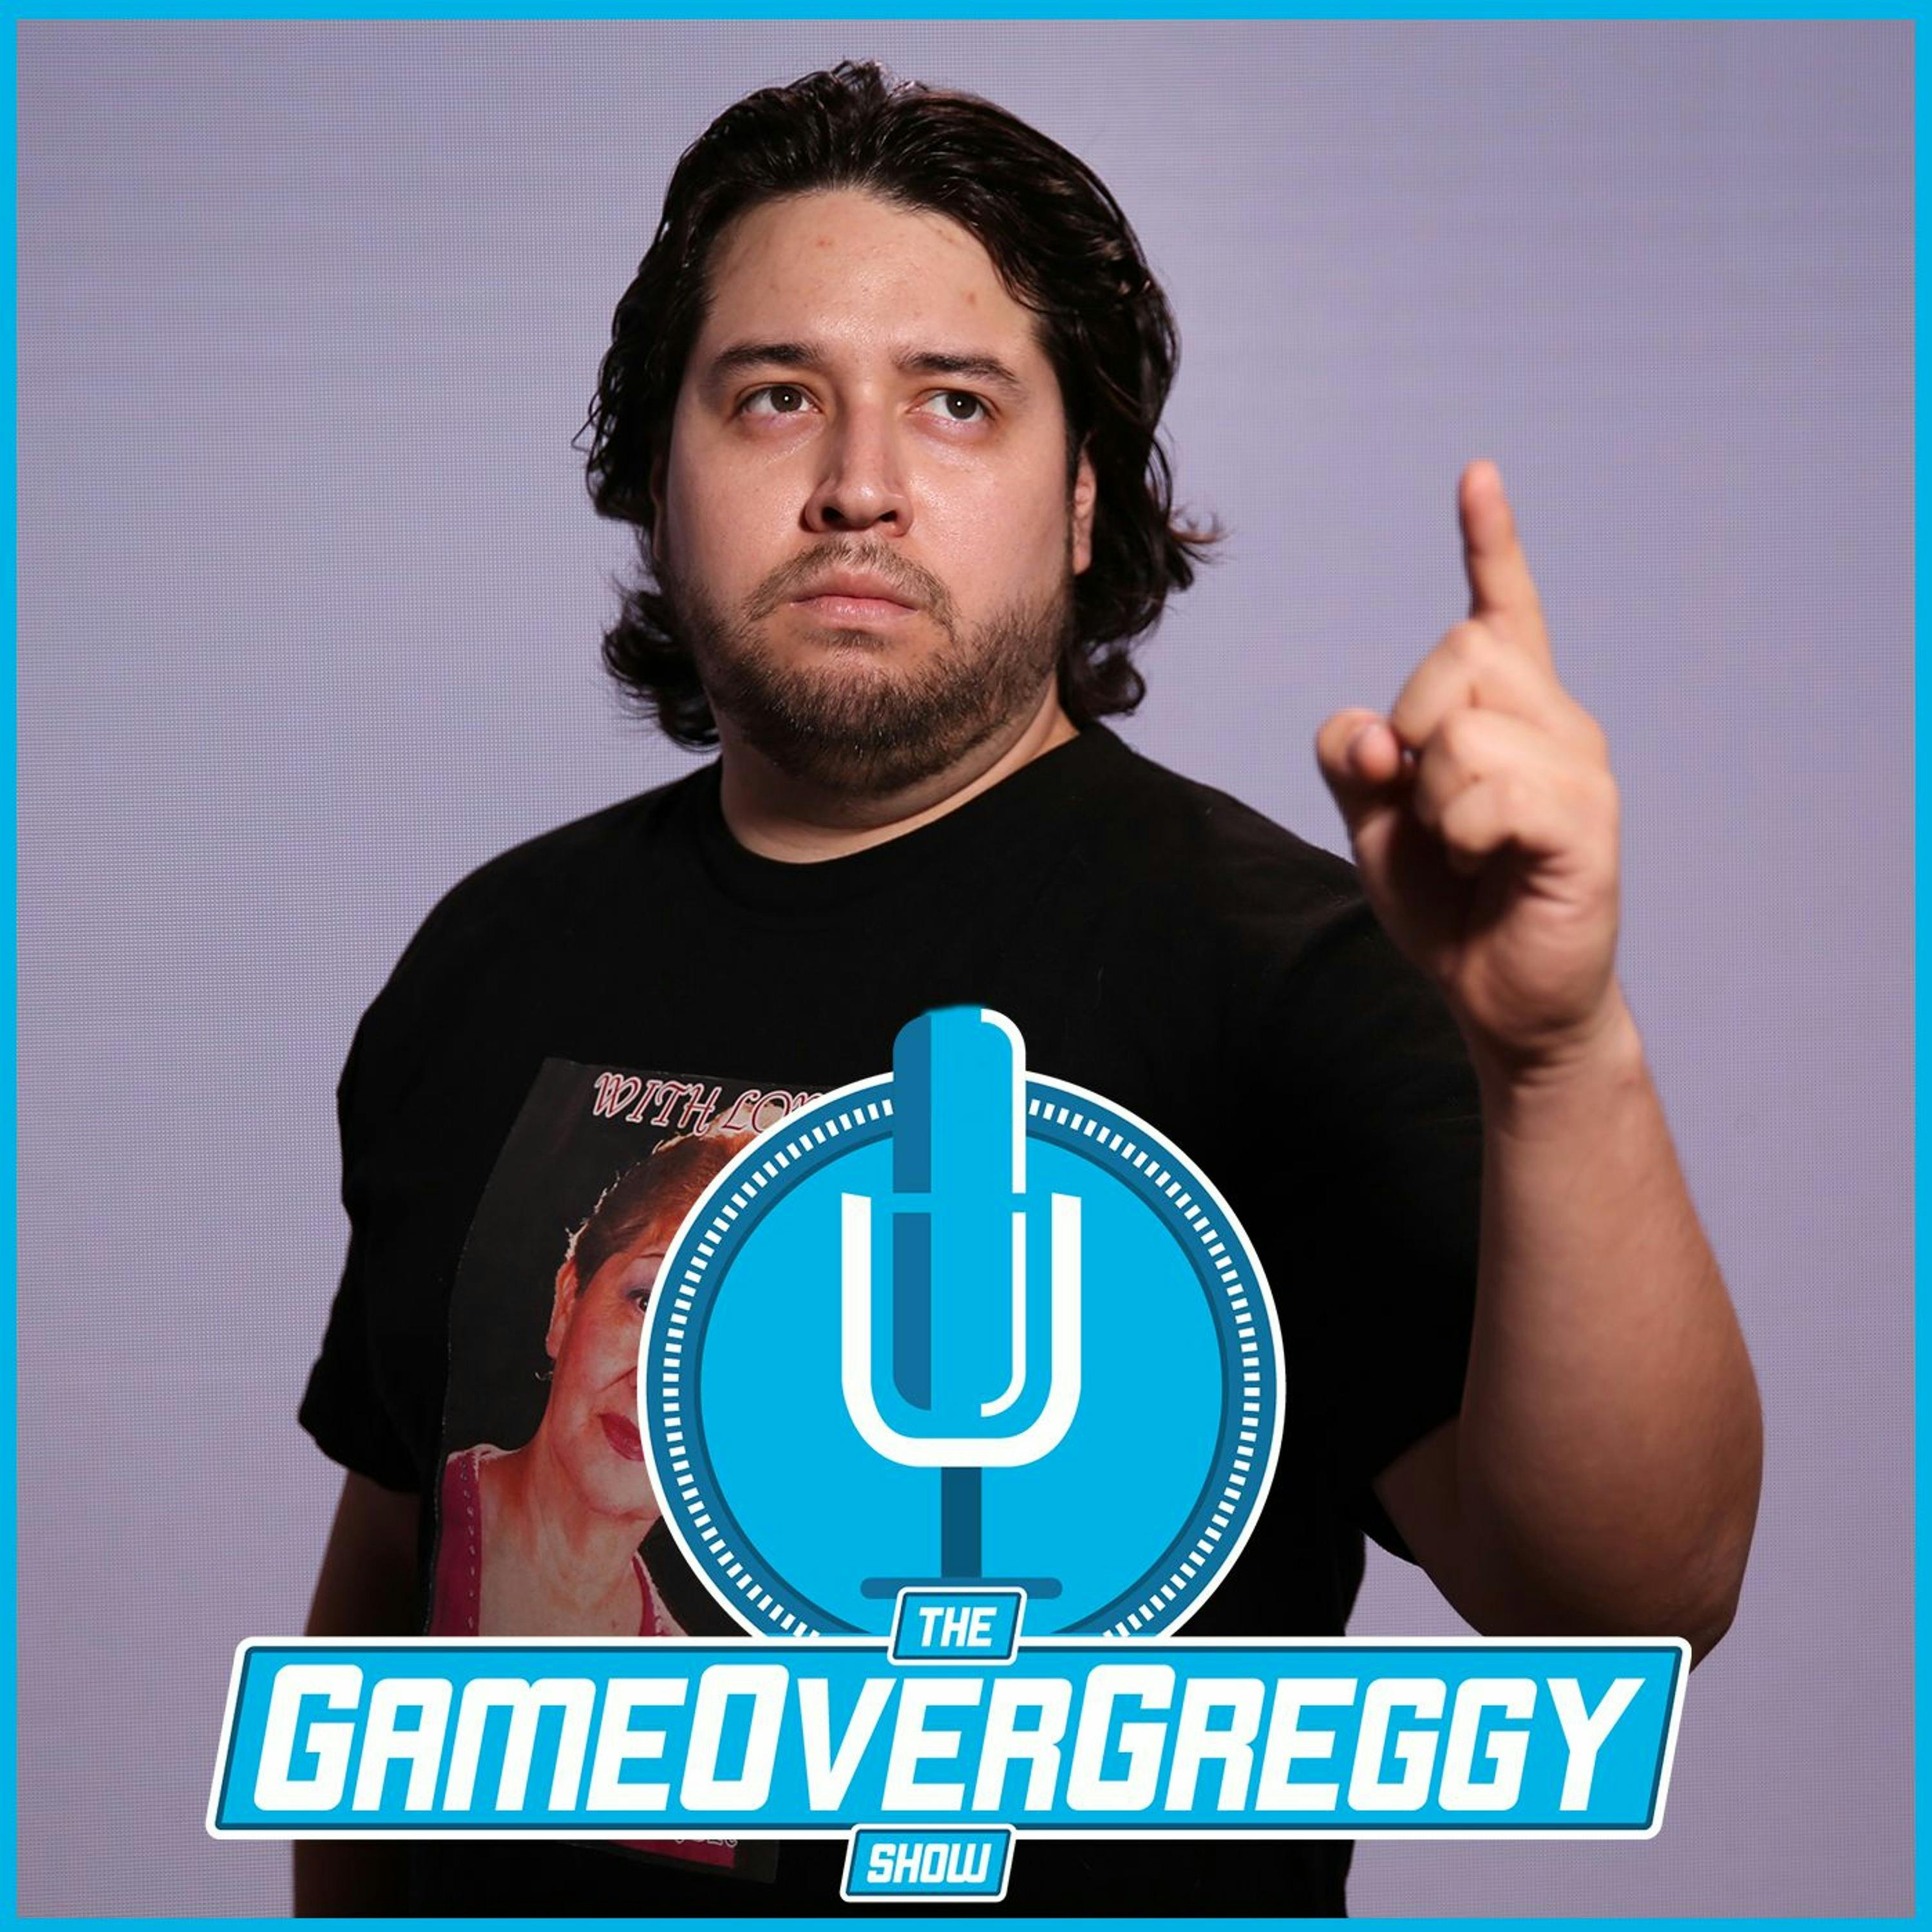 Another Kevin Episode - The GameOverGreggy Show Ep. 196